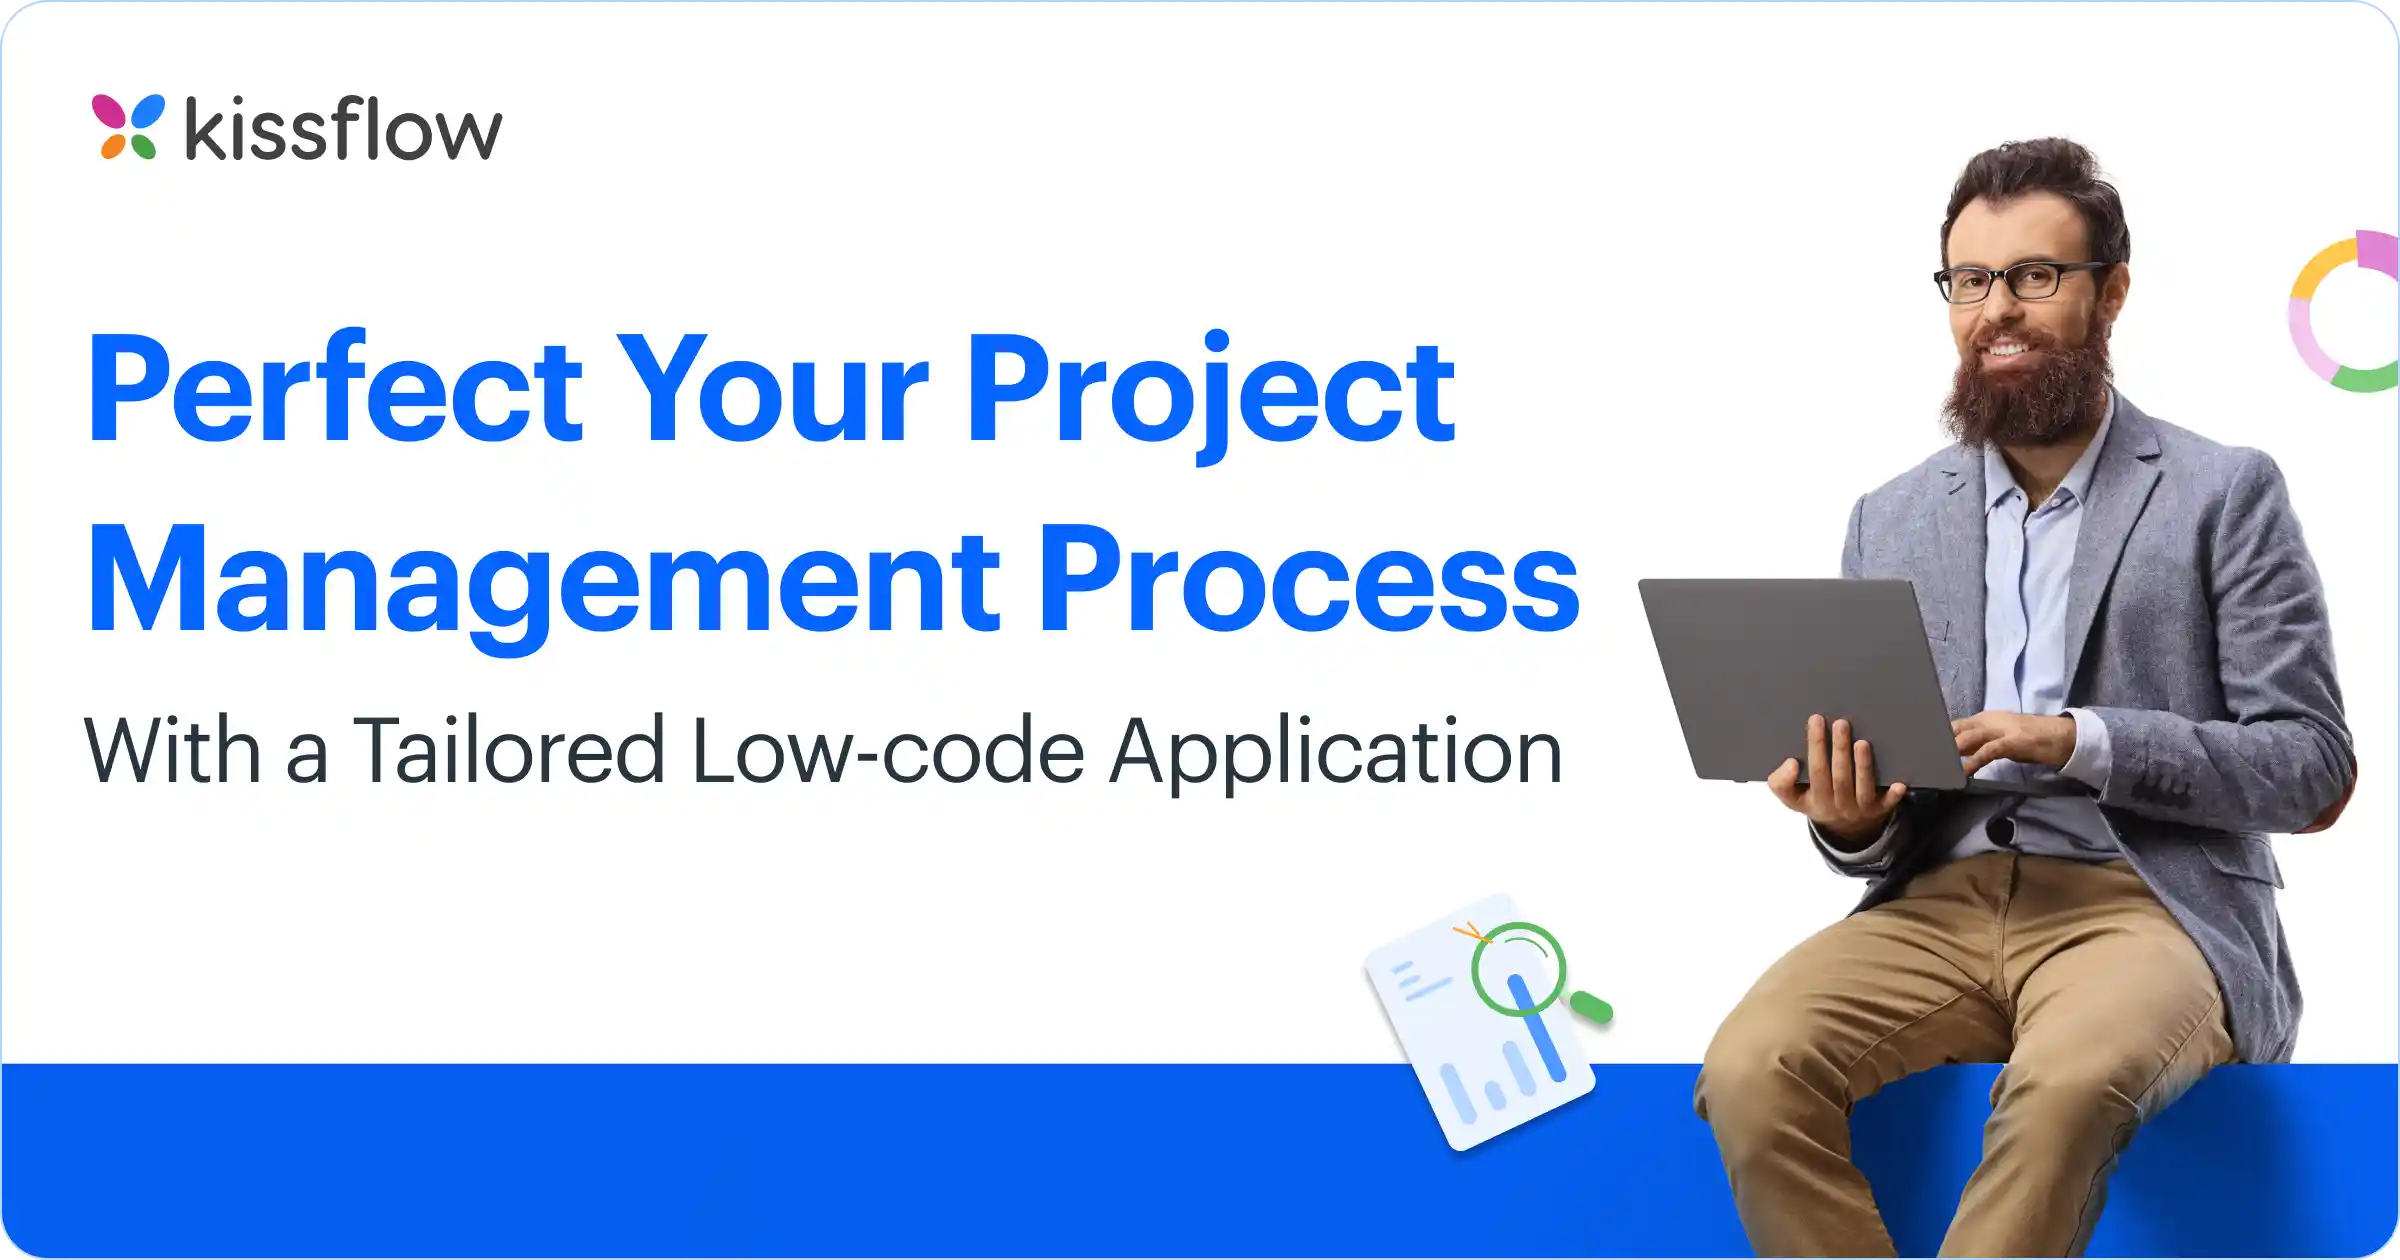 Perfect your project management process with a tailored low-code application